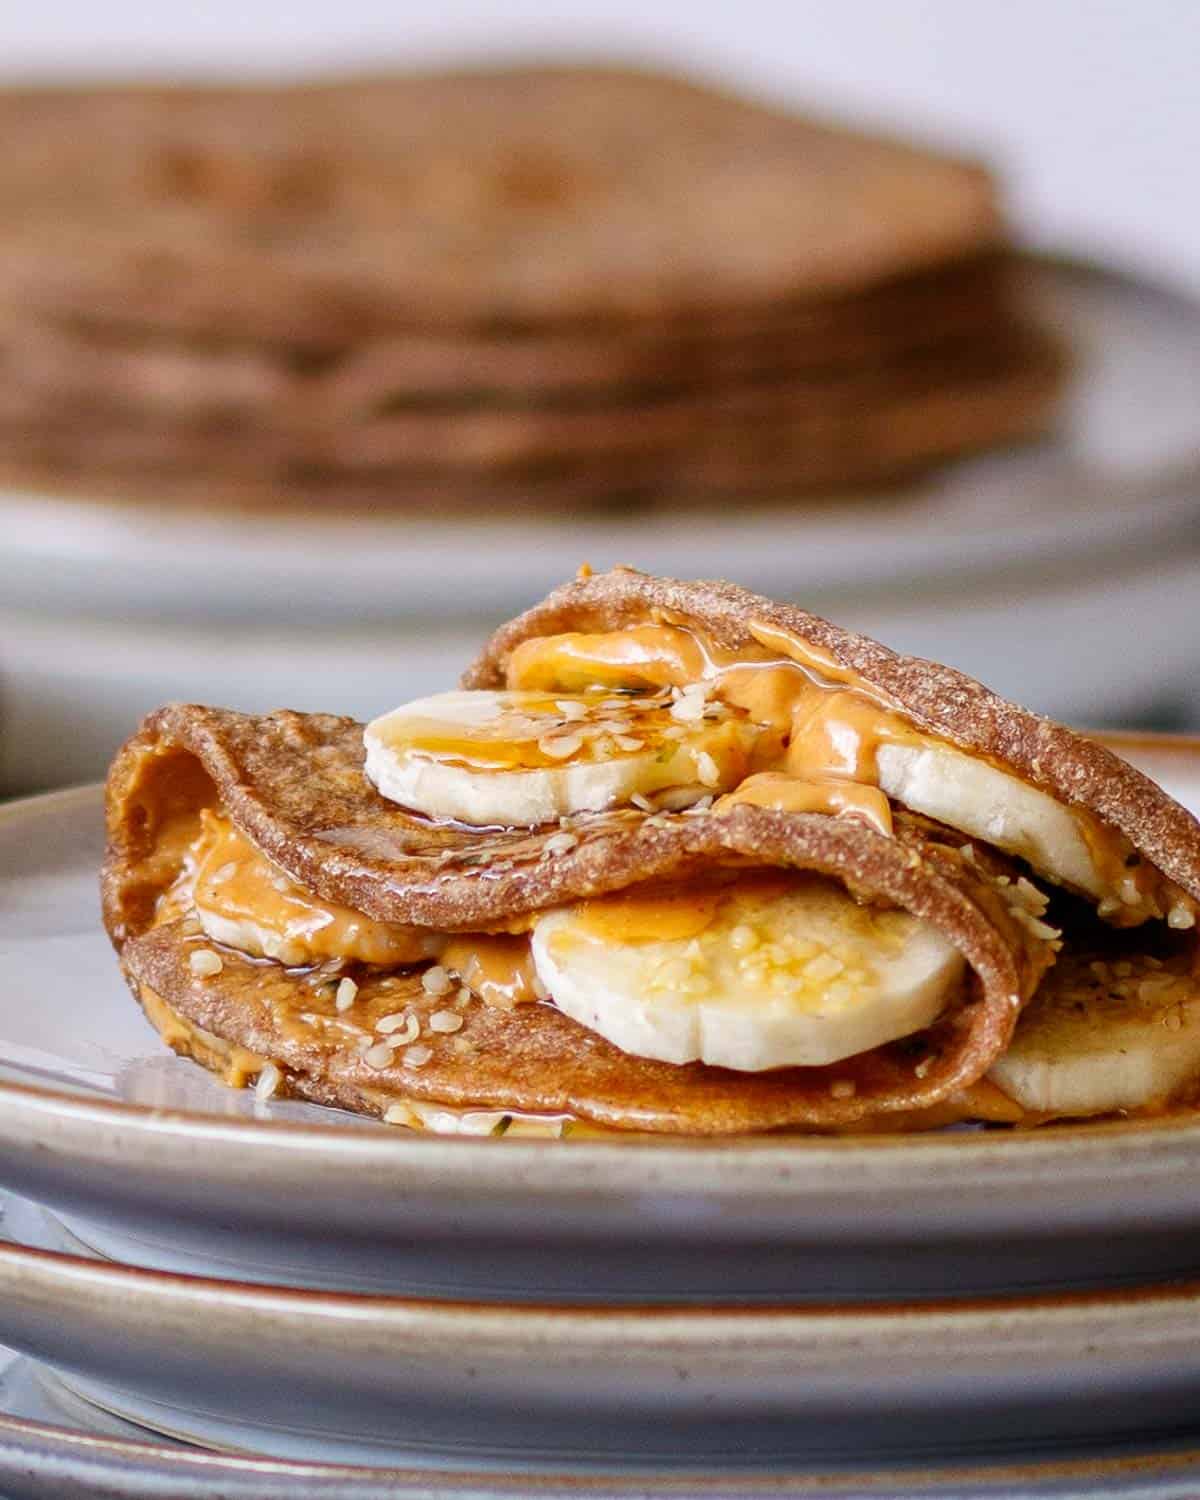 Roti filled with peanut butter and sliced banana drizzled with syrup.